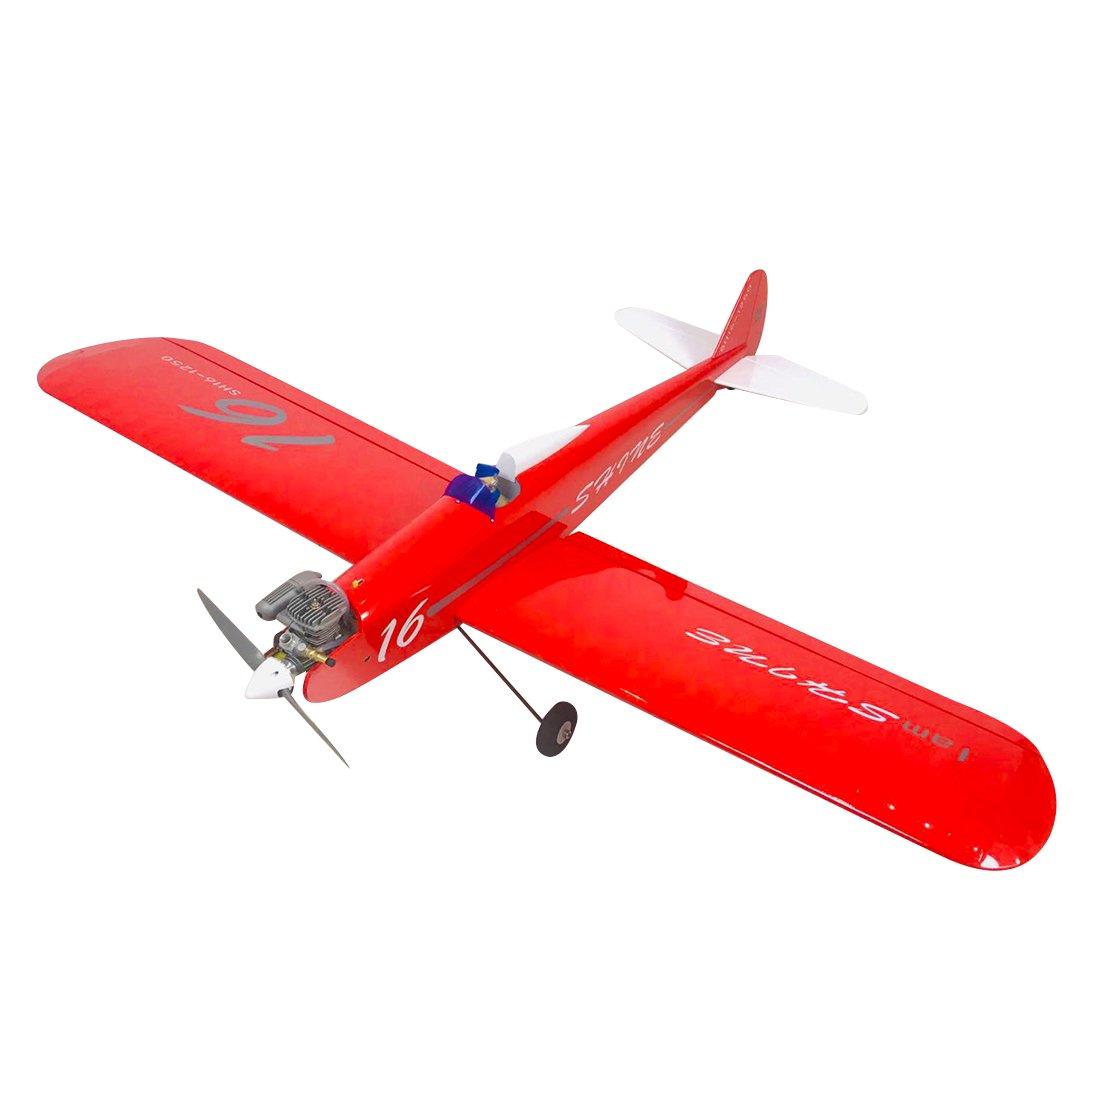 Rc Nitro Planes For Sale: Types of RC Nitro Planes Available 